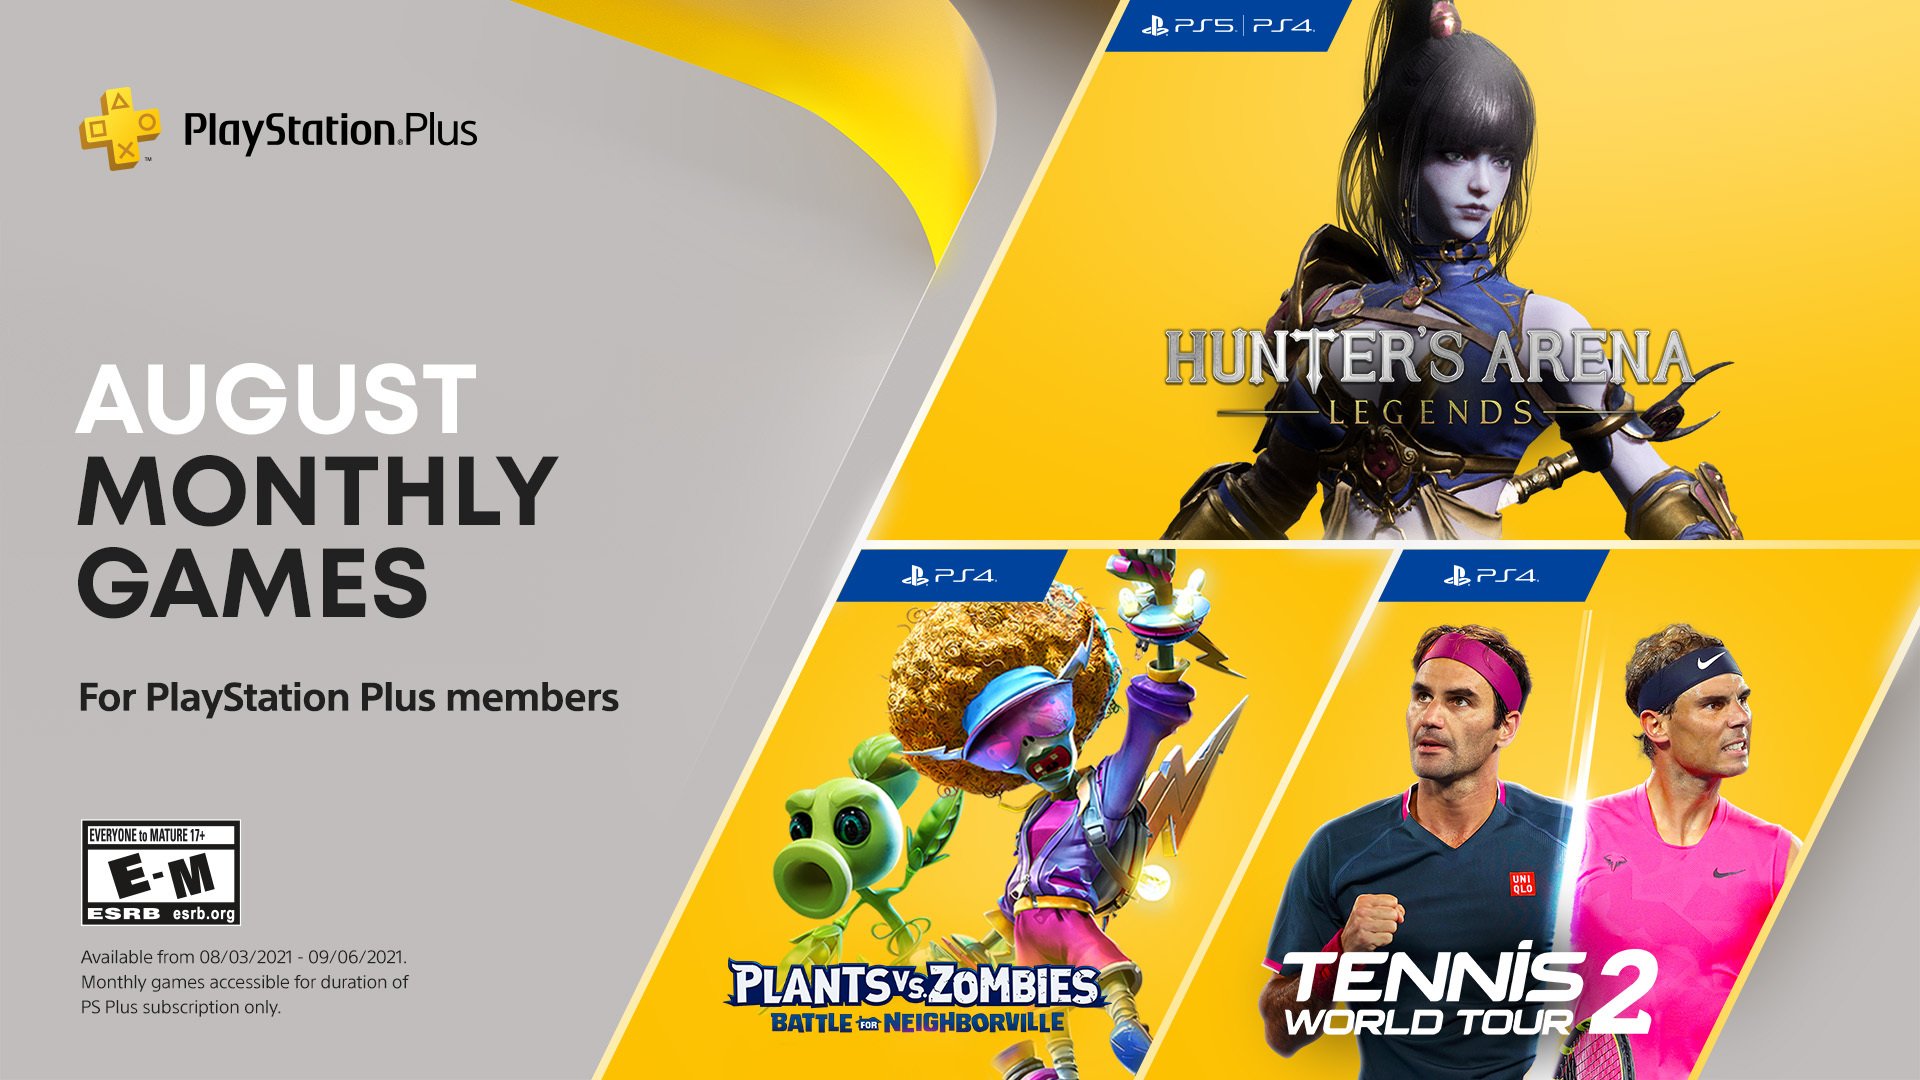 PlayStation Plus November 2021 free games announced - Polygon